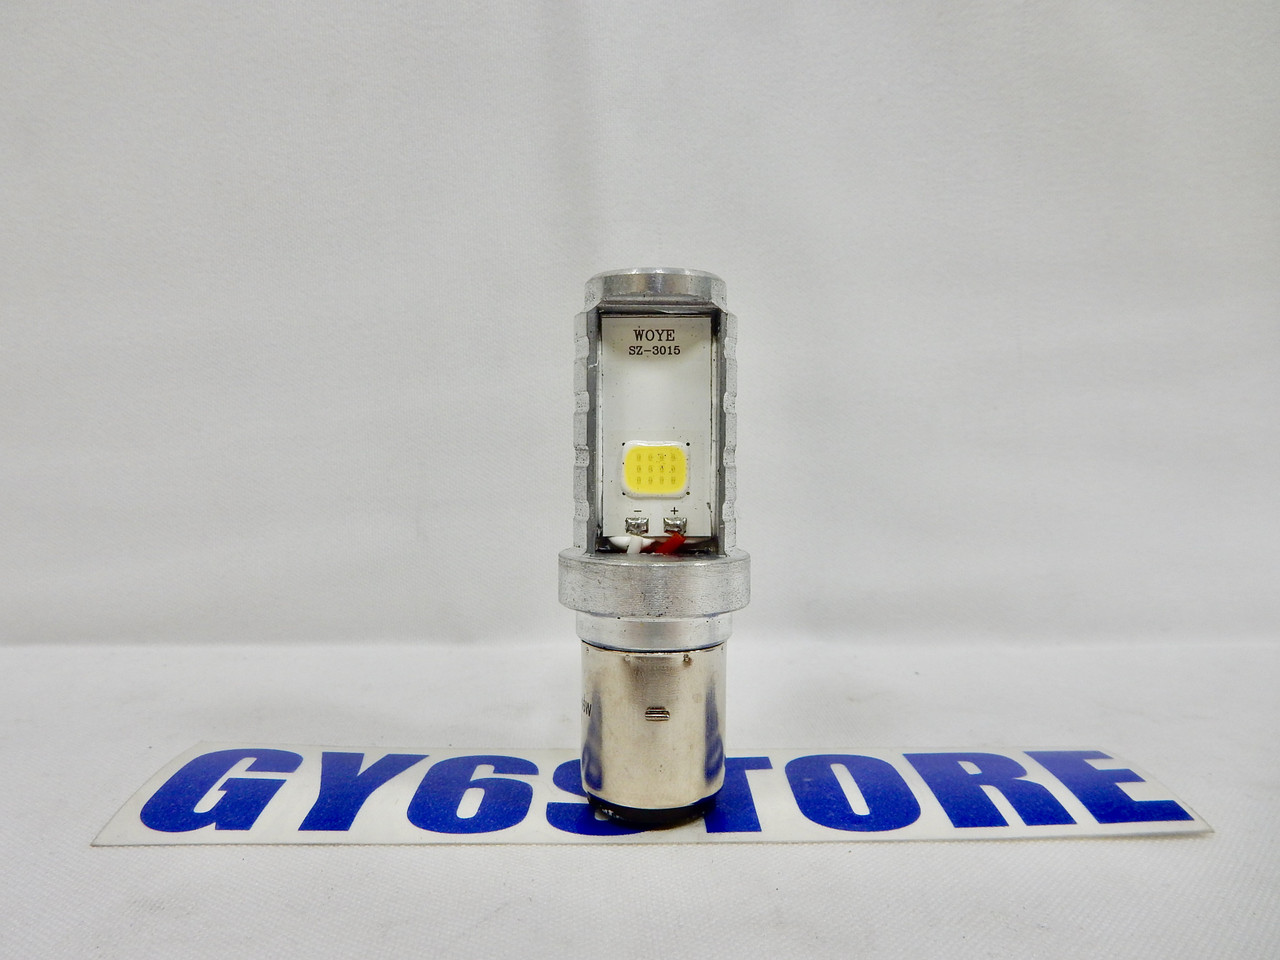 12V 80V 16W LED HEADLIGHT BULB FOR 50cc QMB139 & 150cc GY6 SCOOTERS -  gy6racing